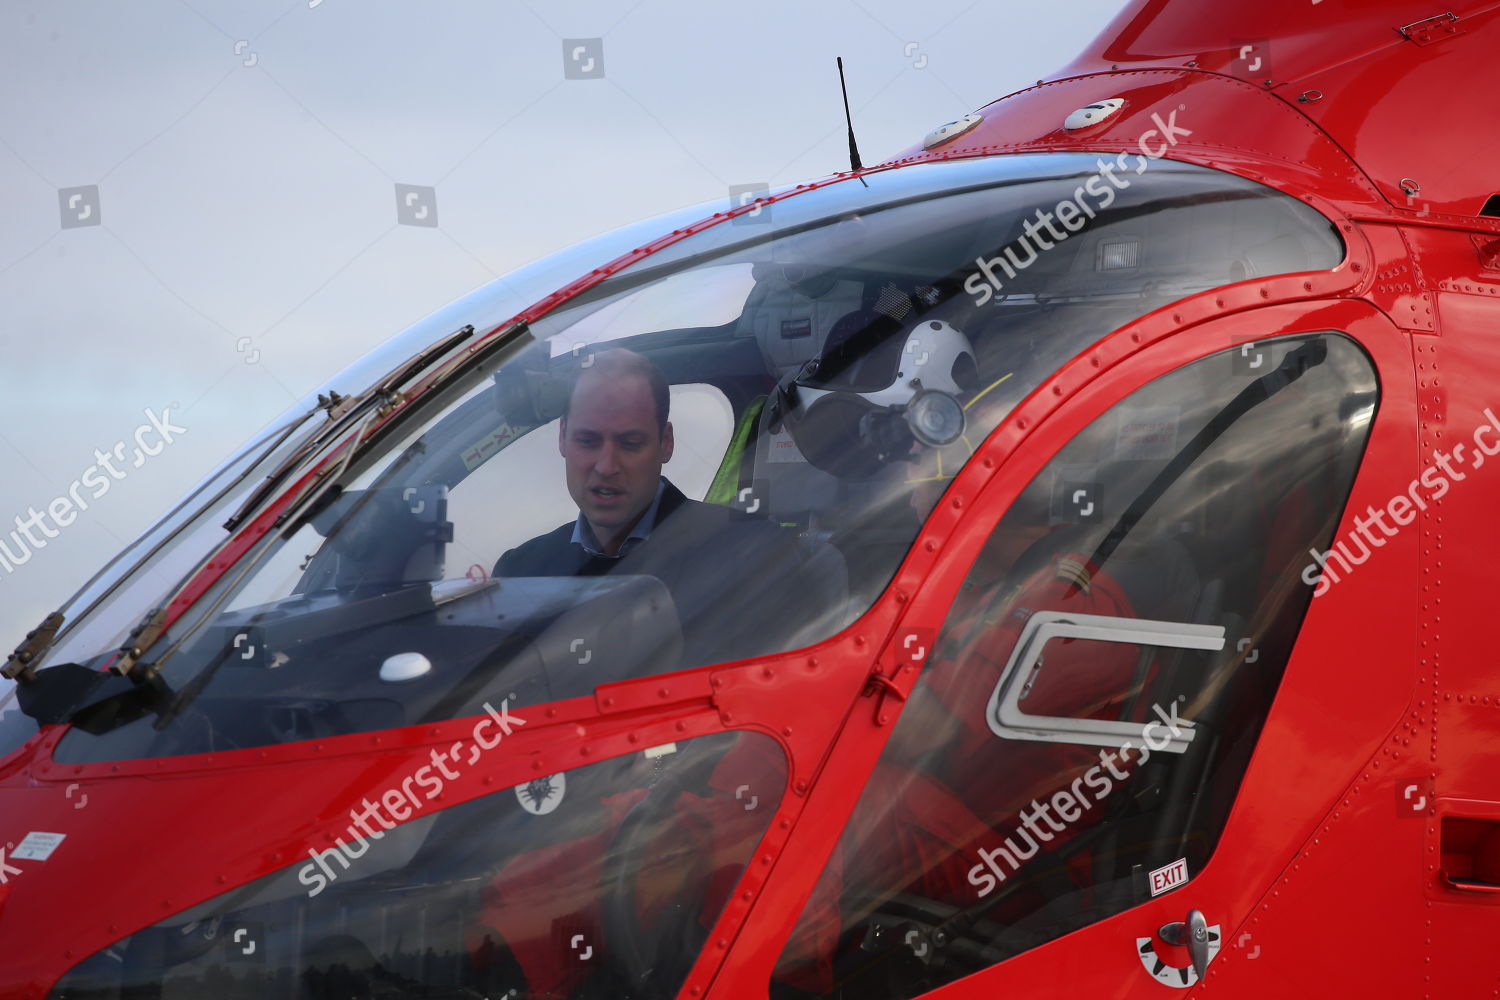 prince-william-arrives-at-the-royal-london-hospital-aboard-an-air-ambulance-uk-shutterstock-editorial-10052351d.jpg